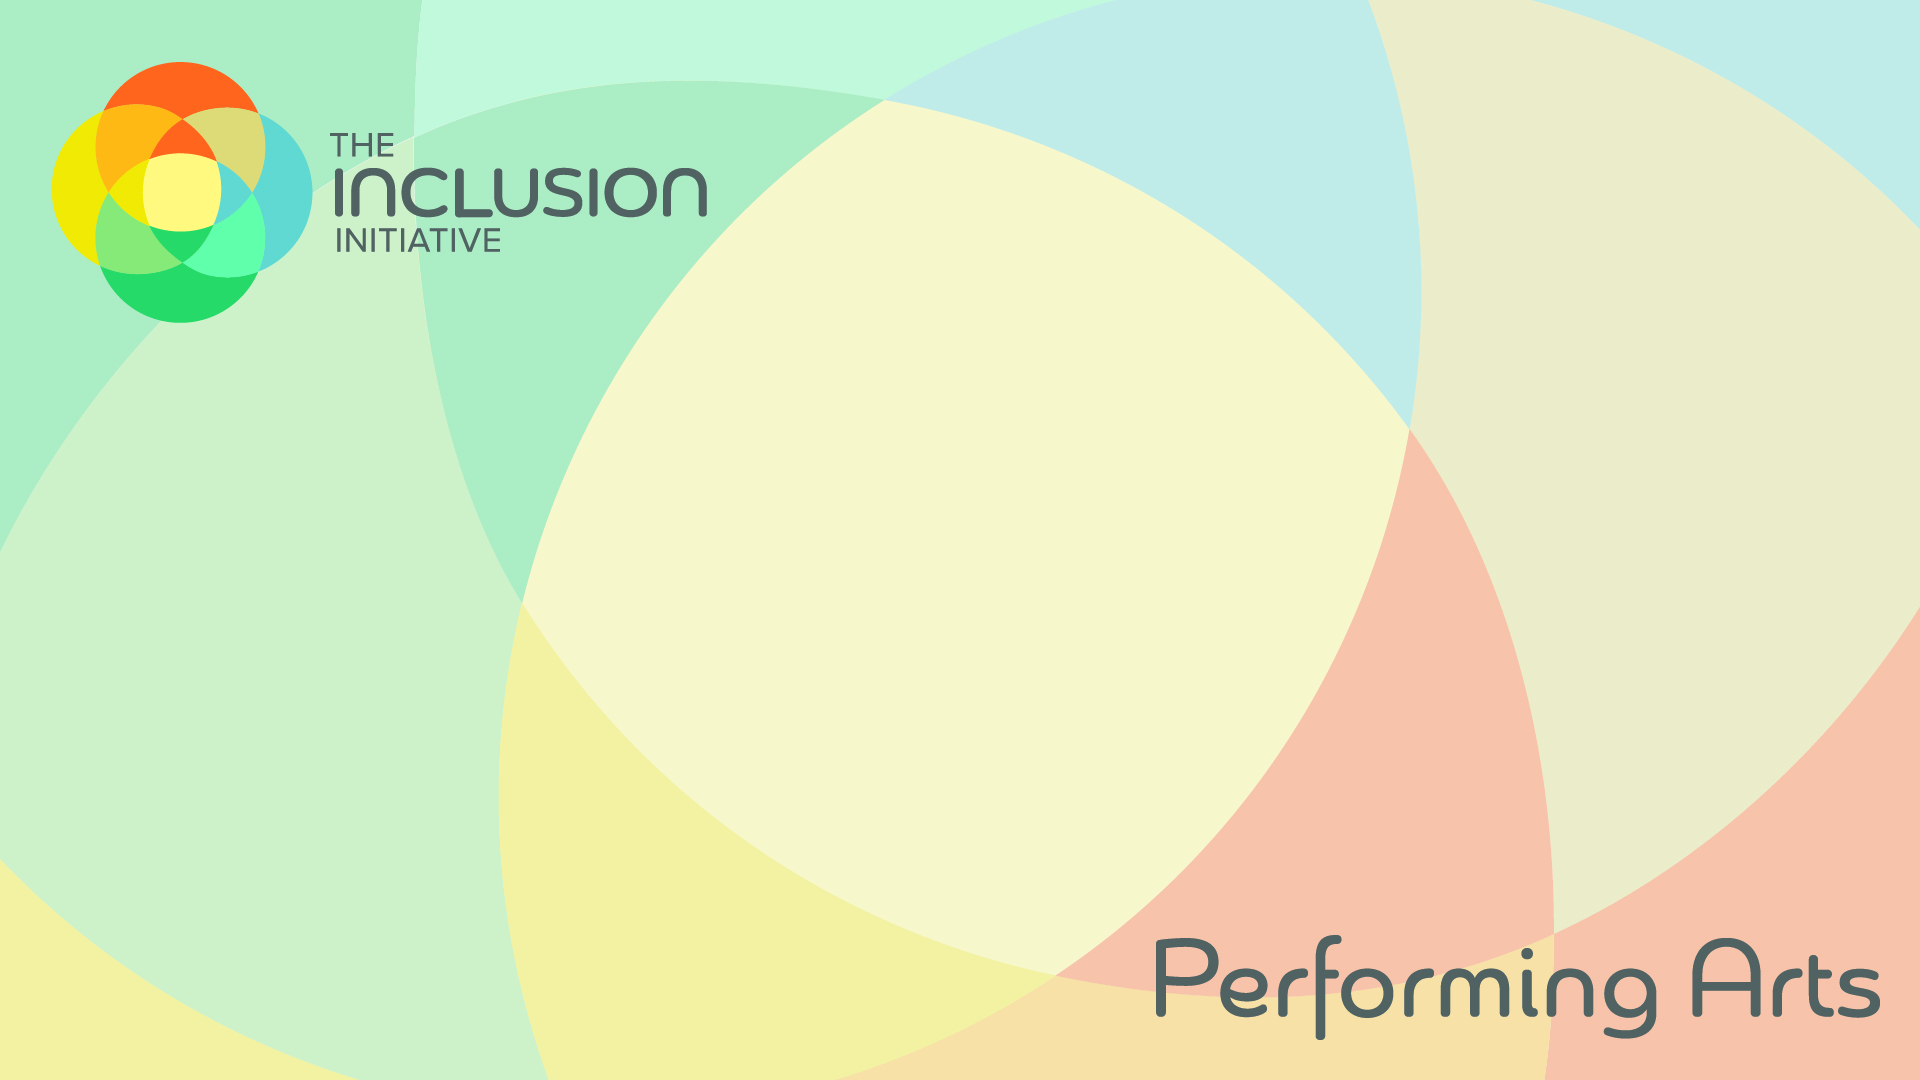 Inclusion Initiative and Performing Arts